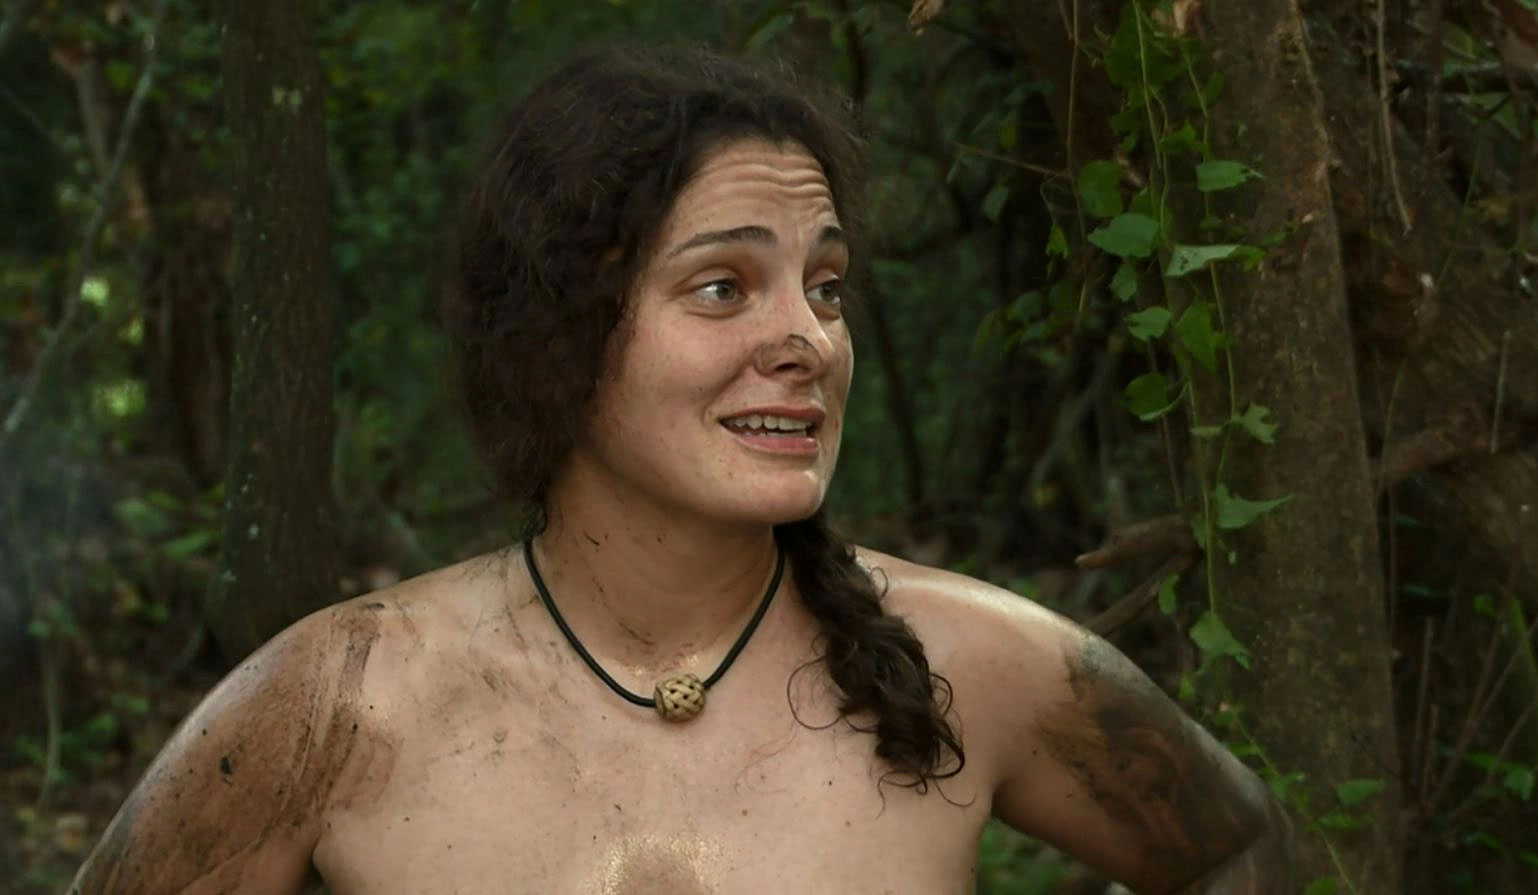 Maine woman returns to 'Naked and Afraid' series in spinoff